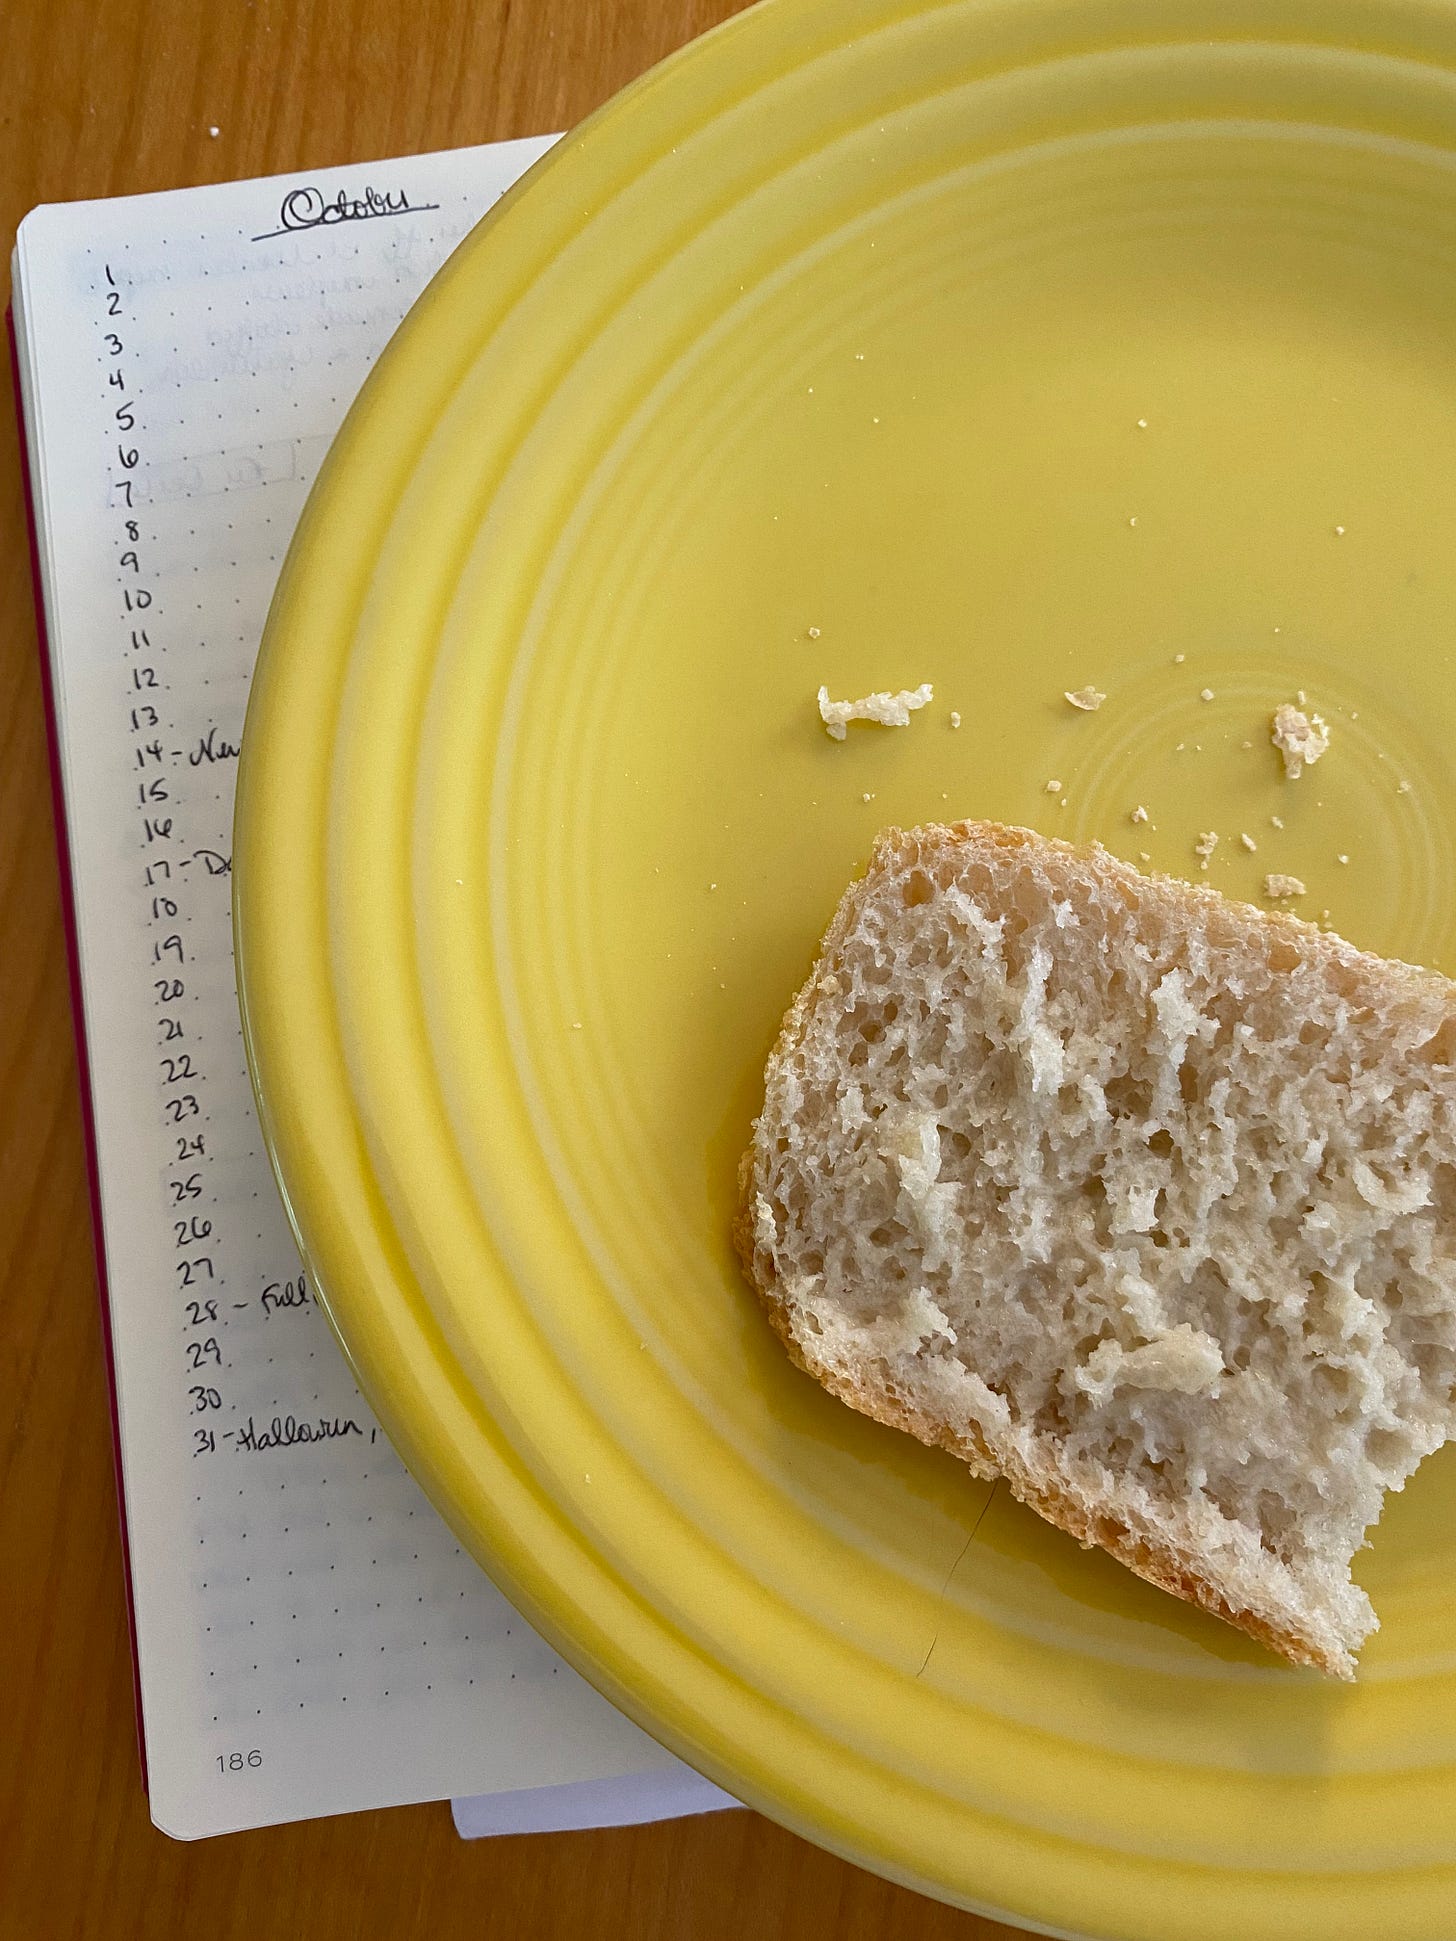 A slice of bread with butter on it has a bite taken out of it. It sits on a yellow fiestaware plate, which sits on top of a notebook open to a page that says "October"